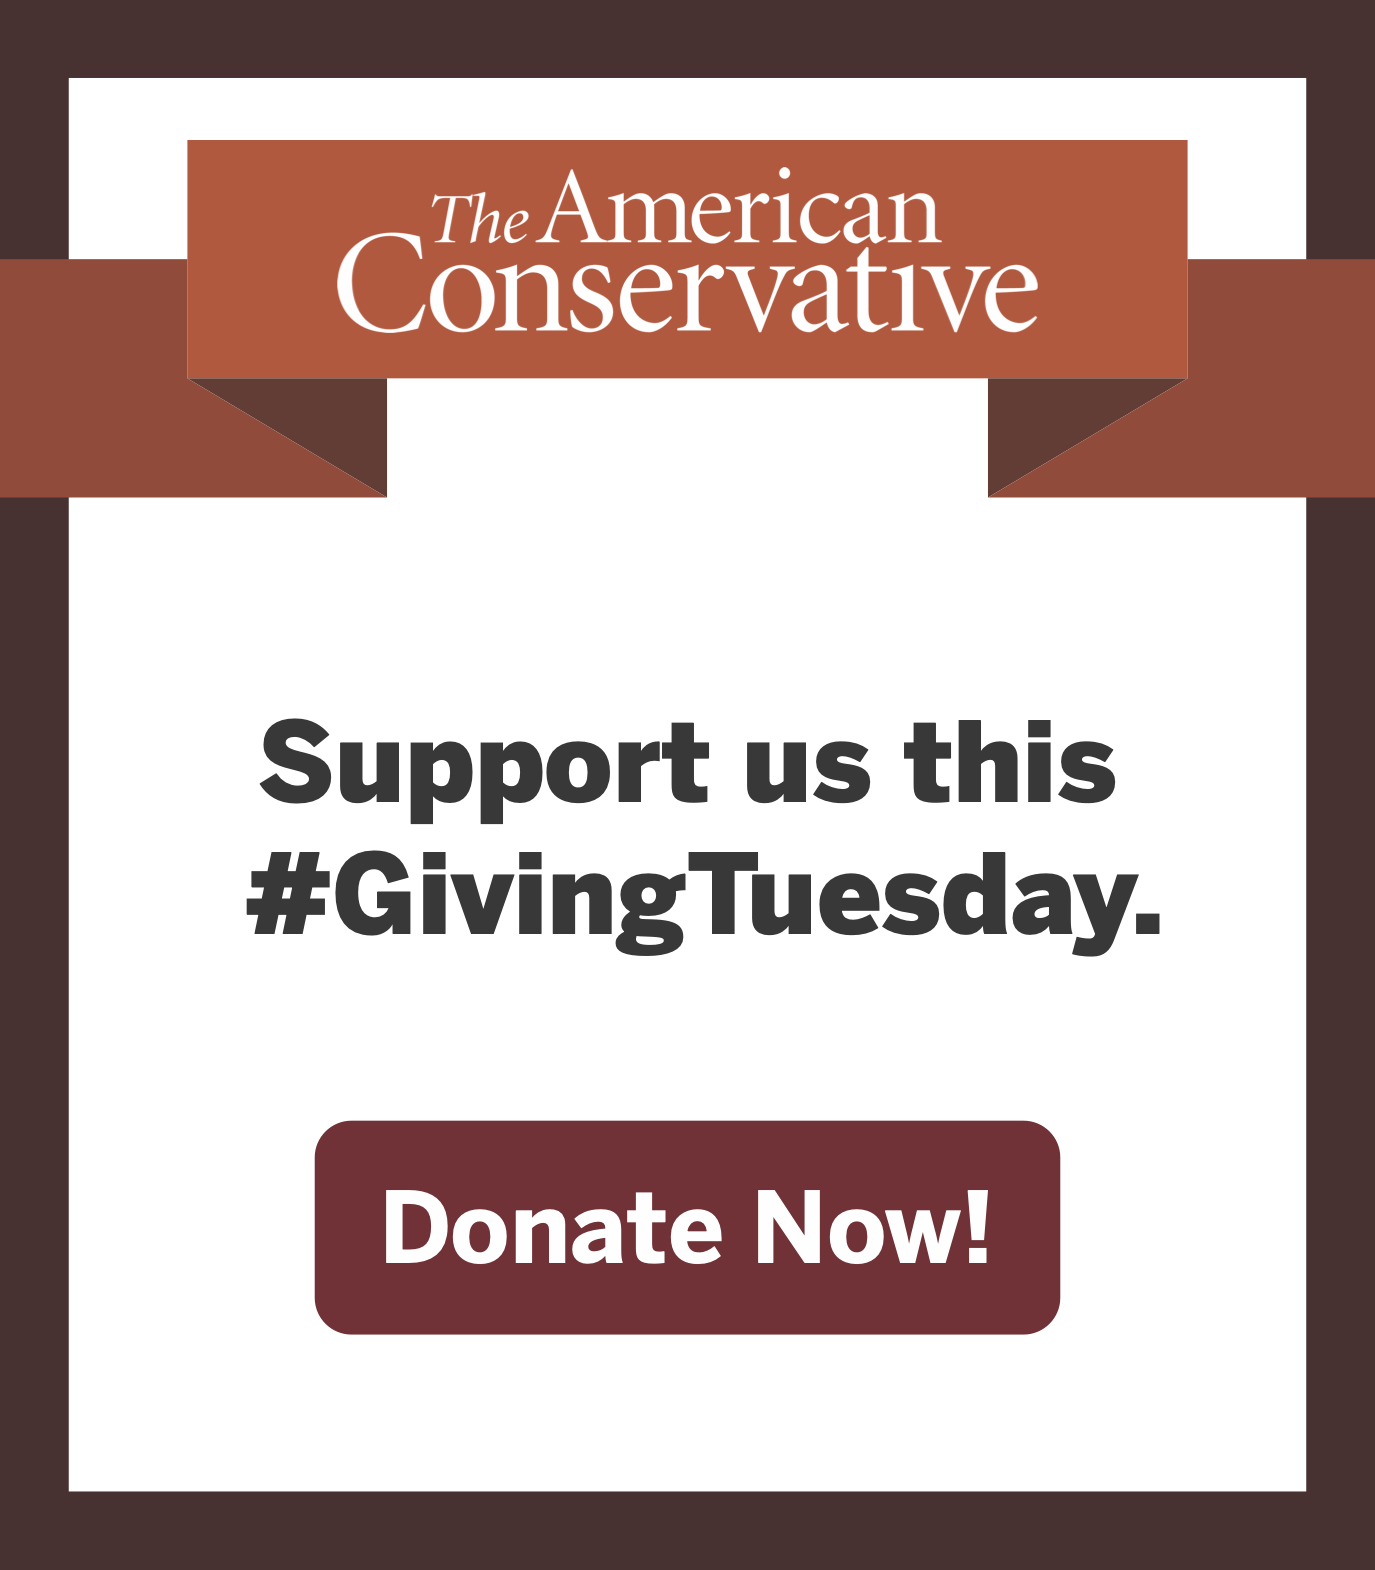 Donate to The American Conservative for Giving Tuesday.